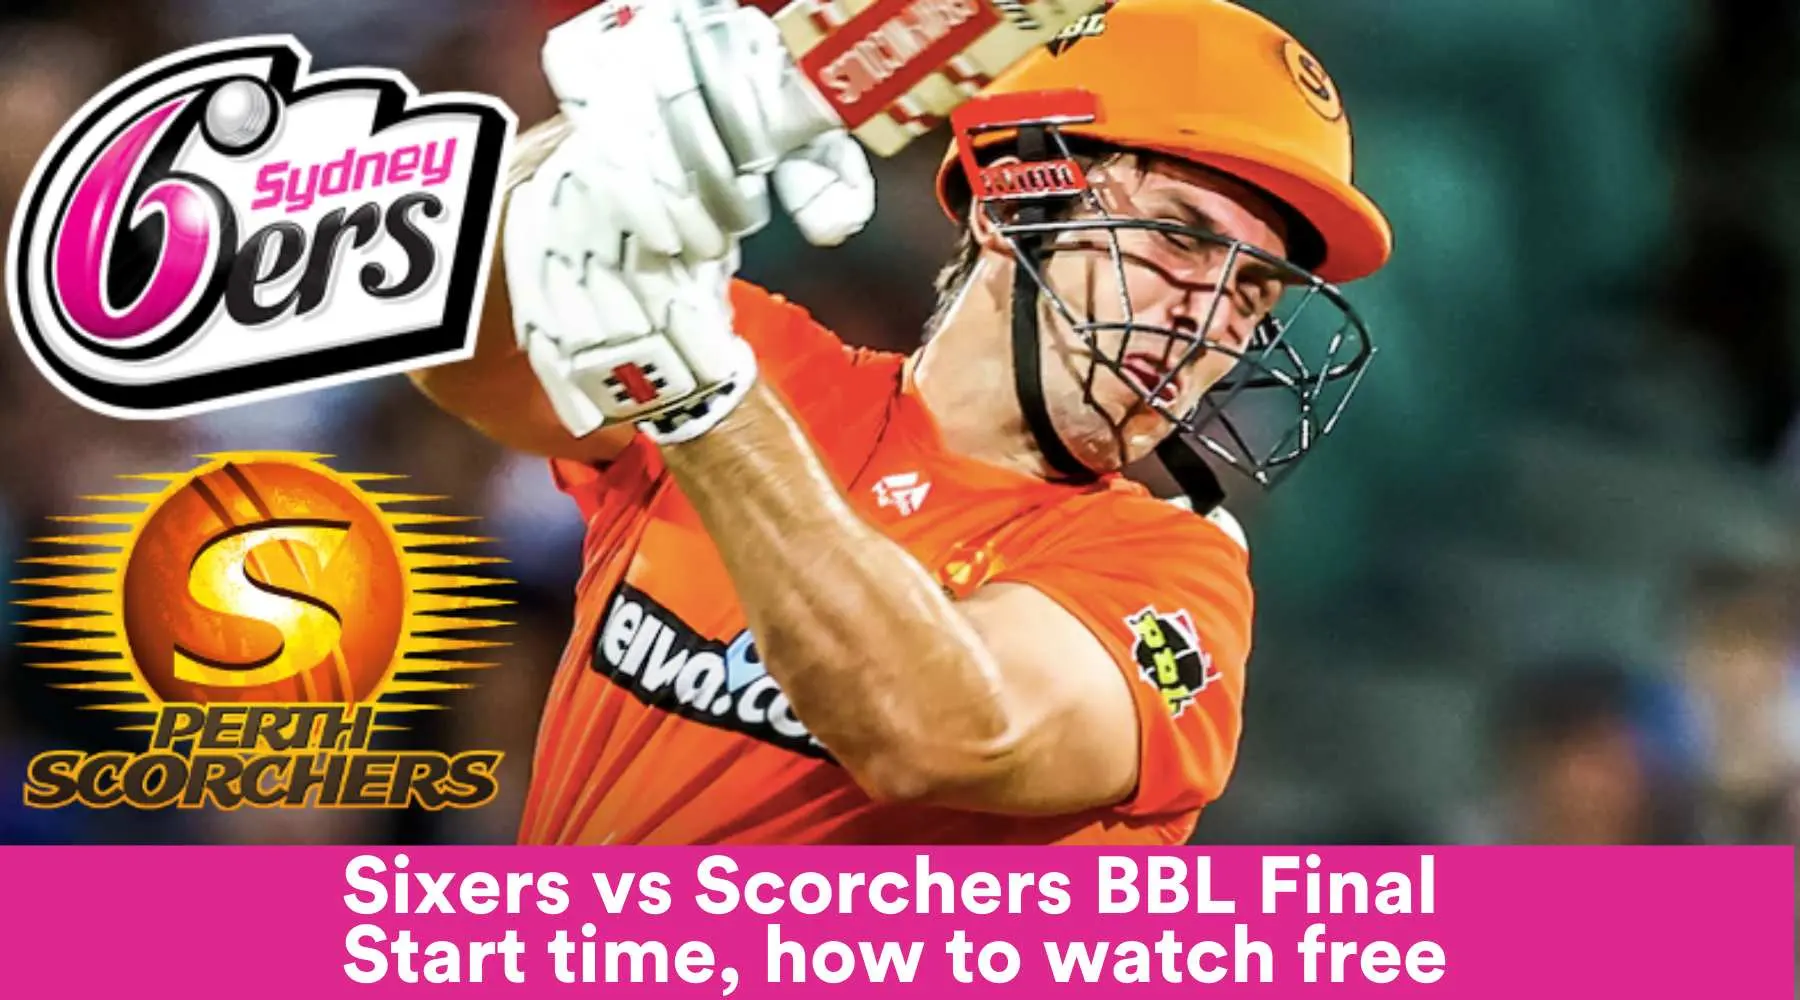 BBL final Sixers vs Scorchers: Start time, how to watch